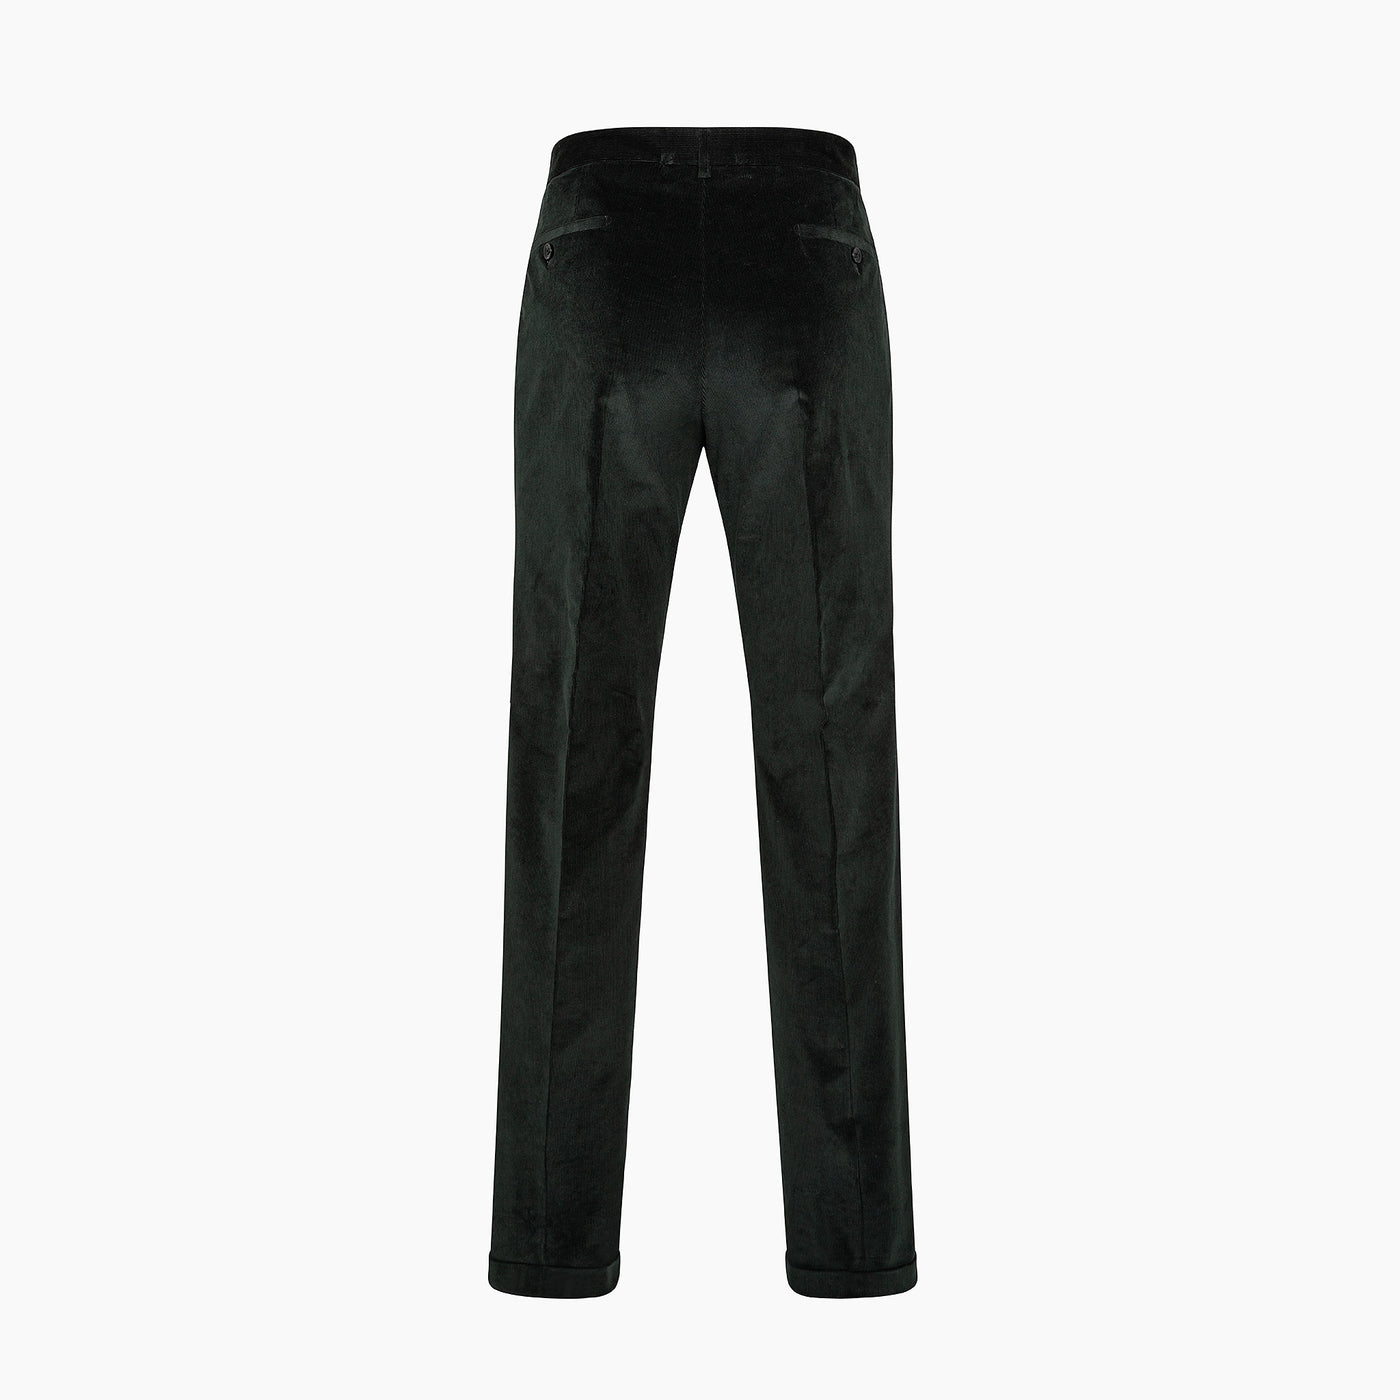 Lowell stretch corduroy wide pleated pants